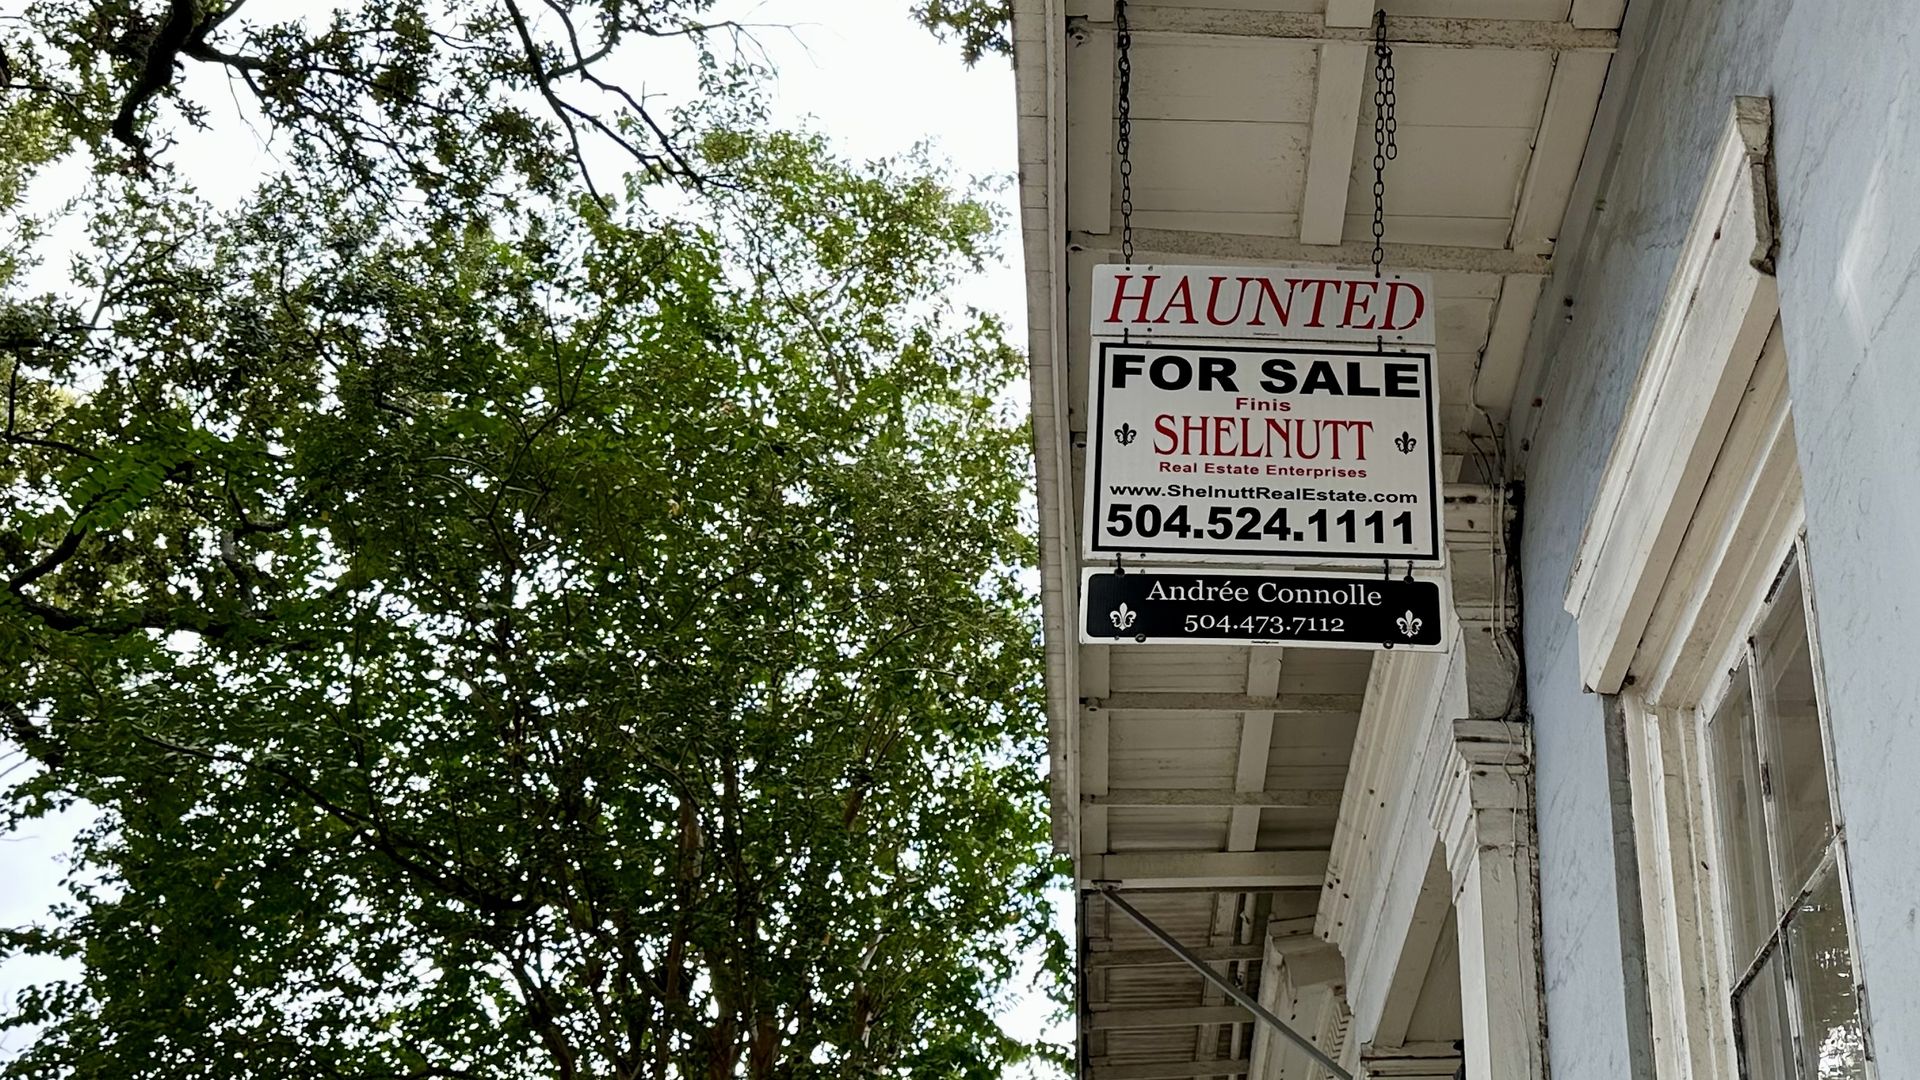 Photo shows a haunted real estate sign